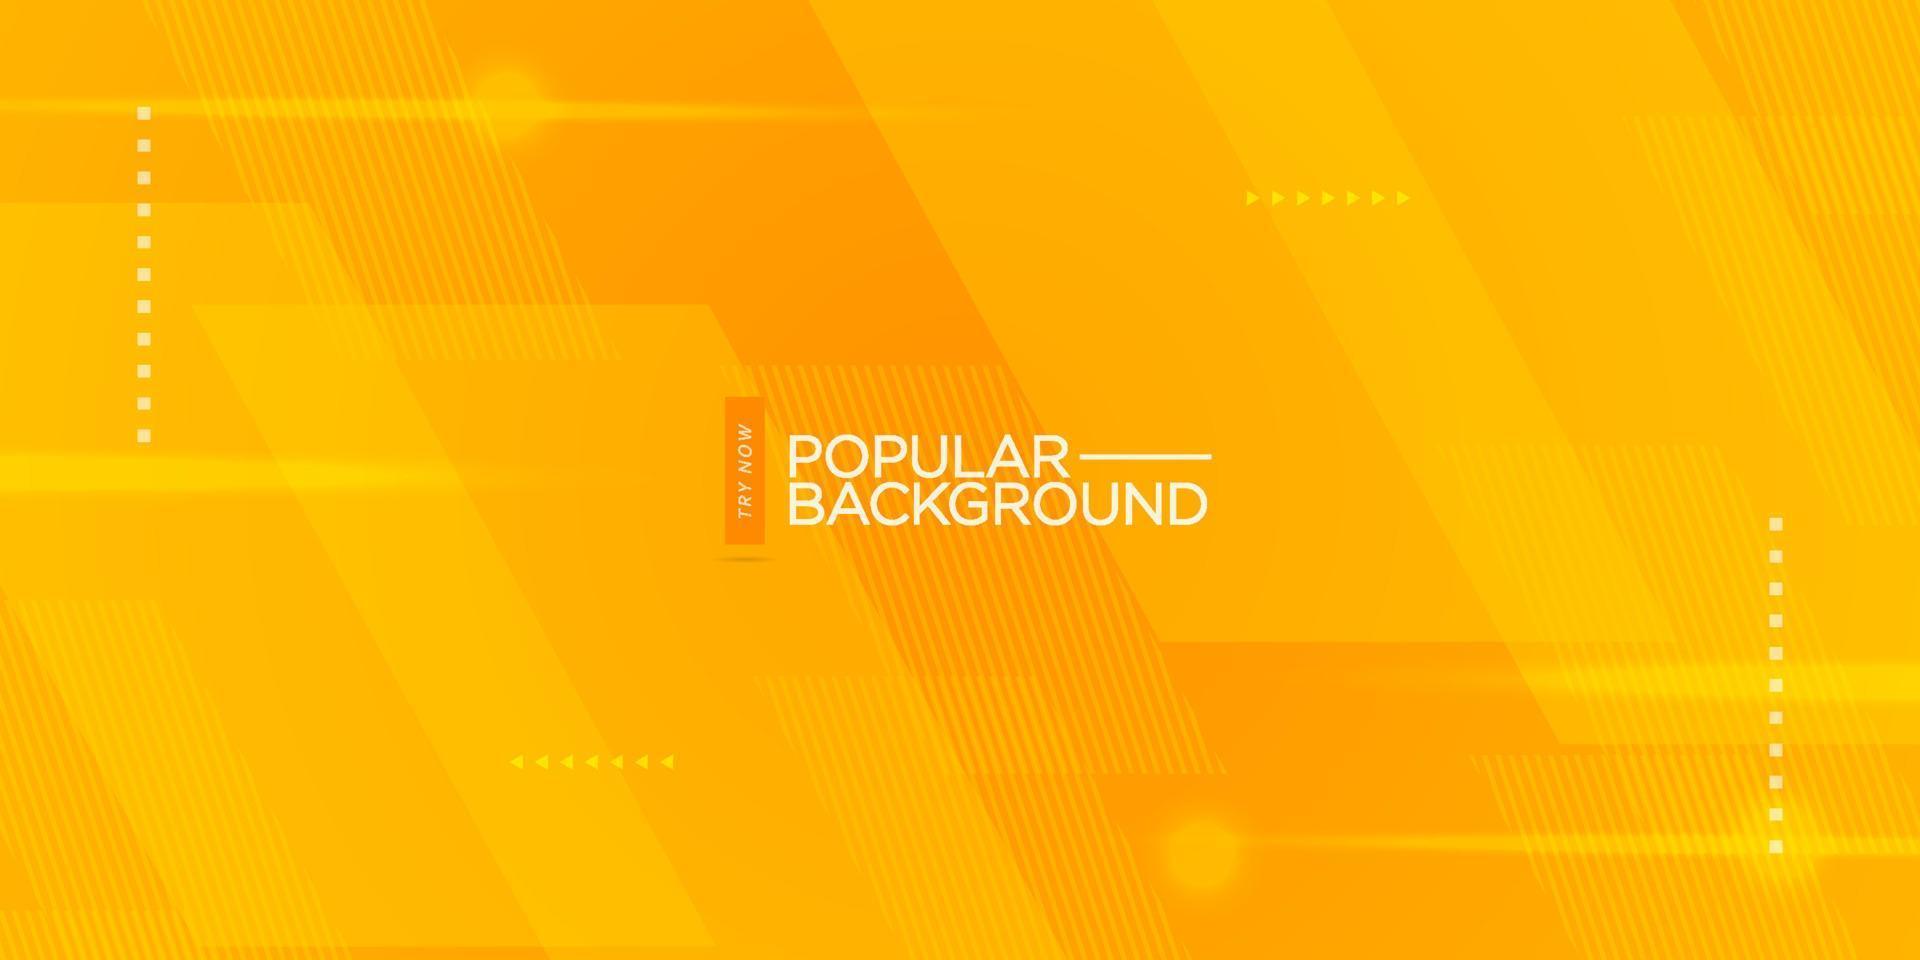 Abstract bright yellow background with geometric shapes, lights and shadows on background design.Eps10 vector